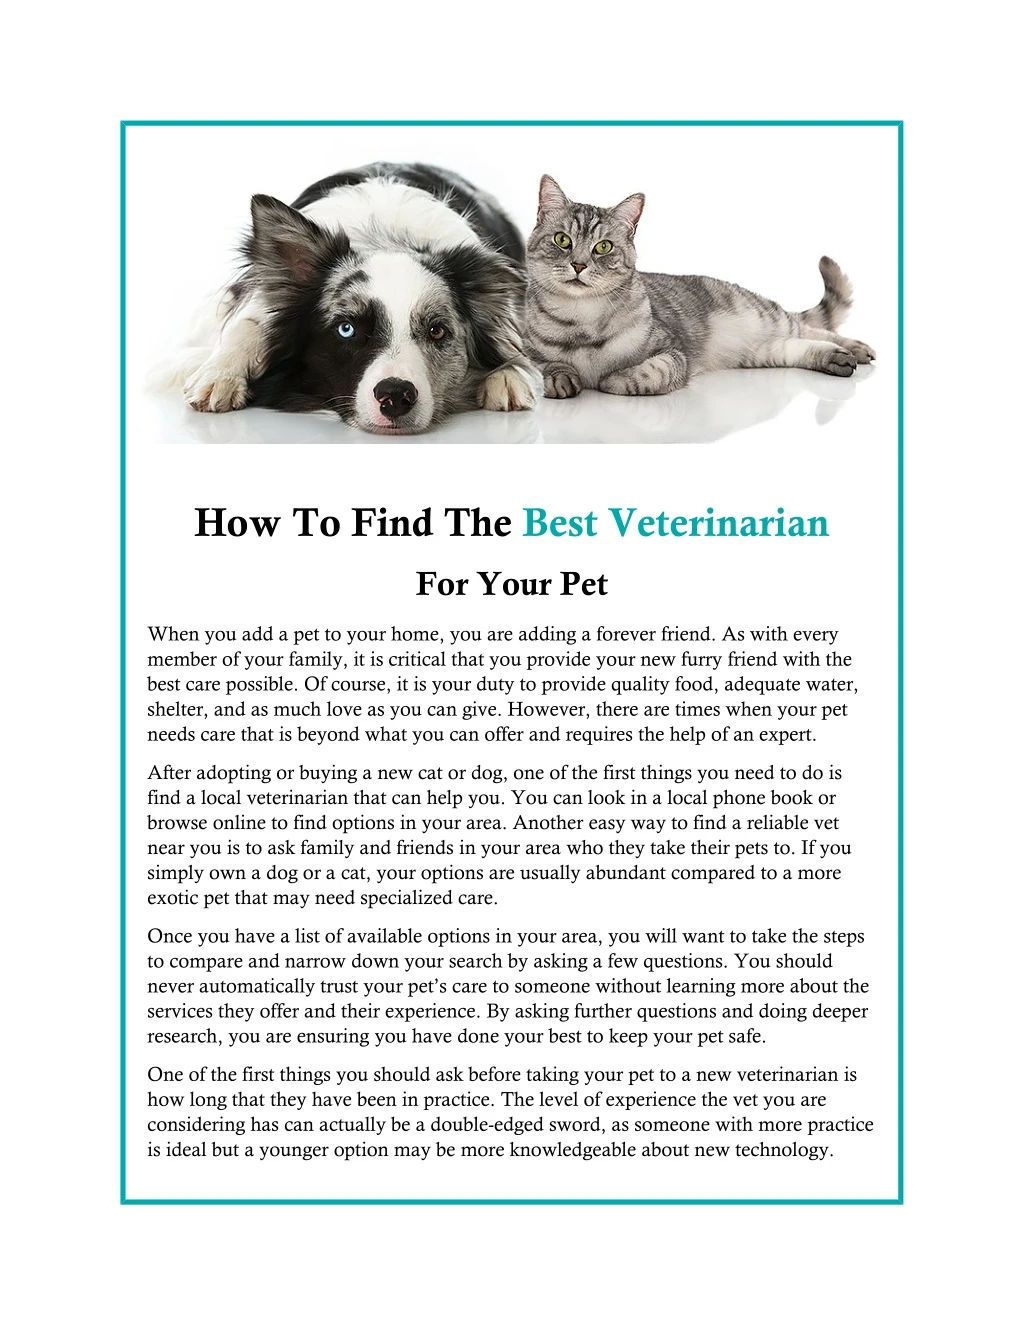 how to find the best veterinarian